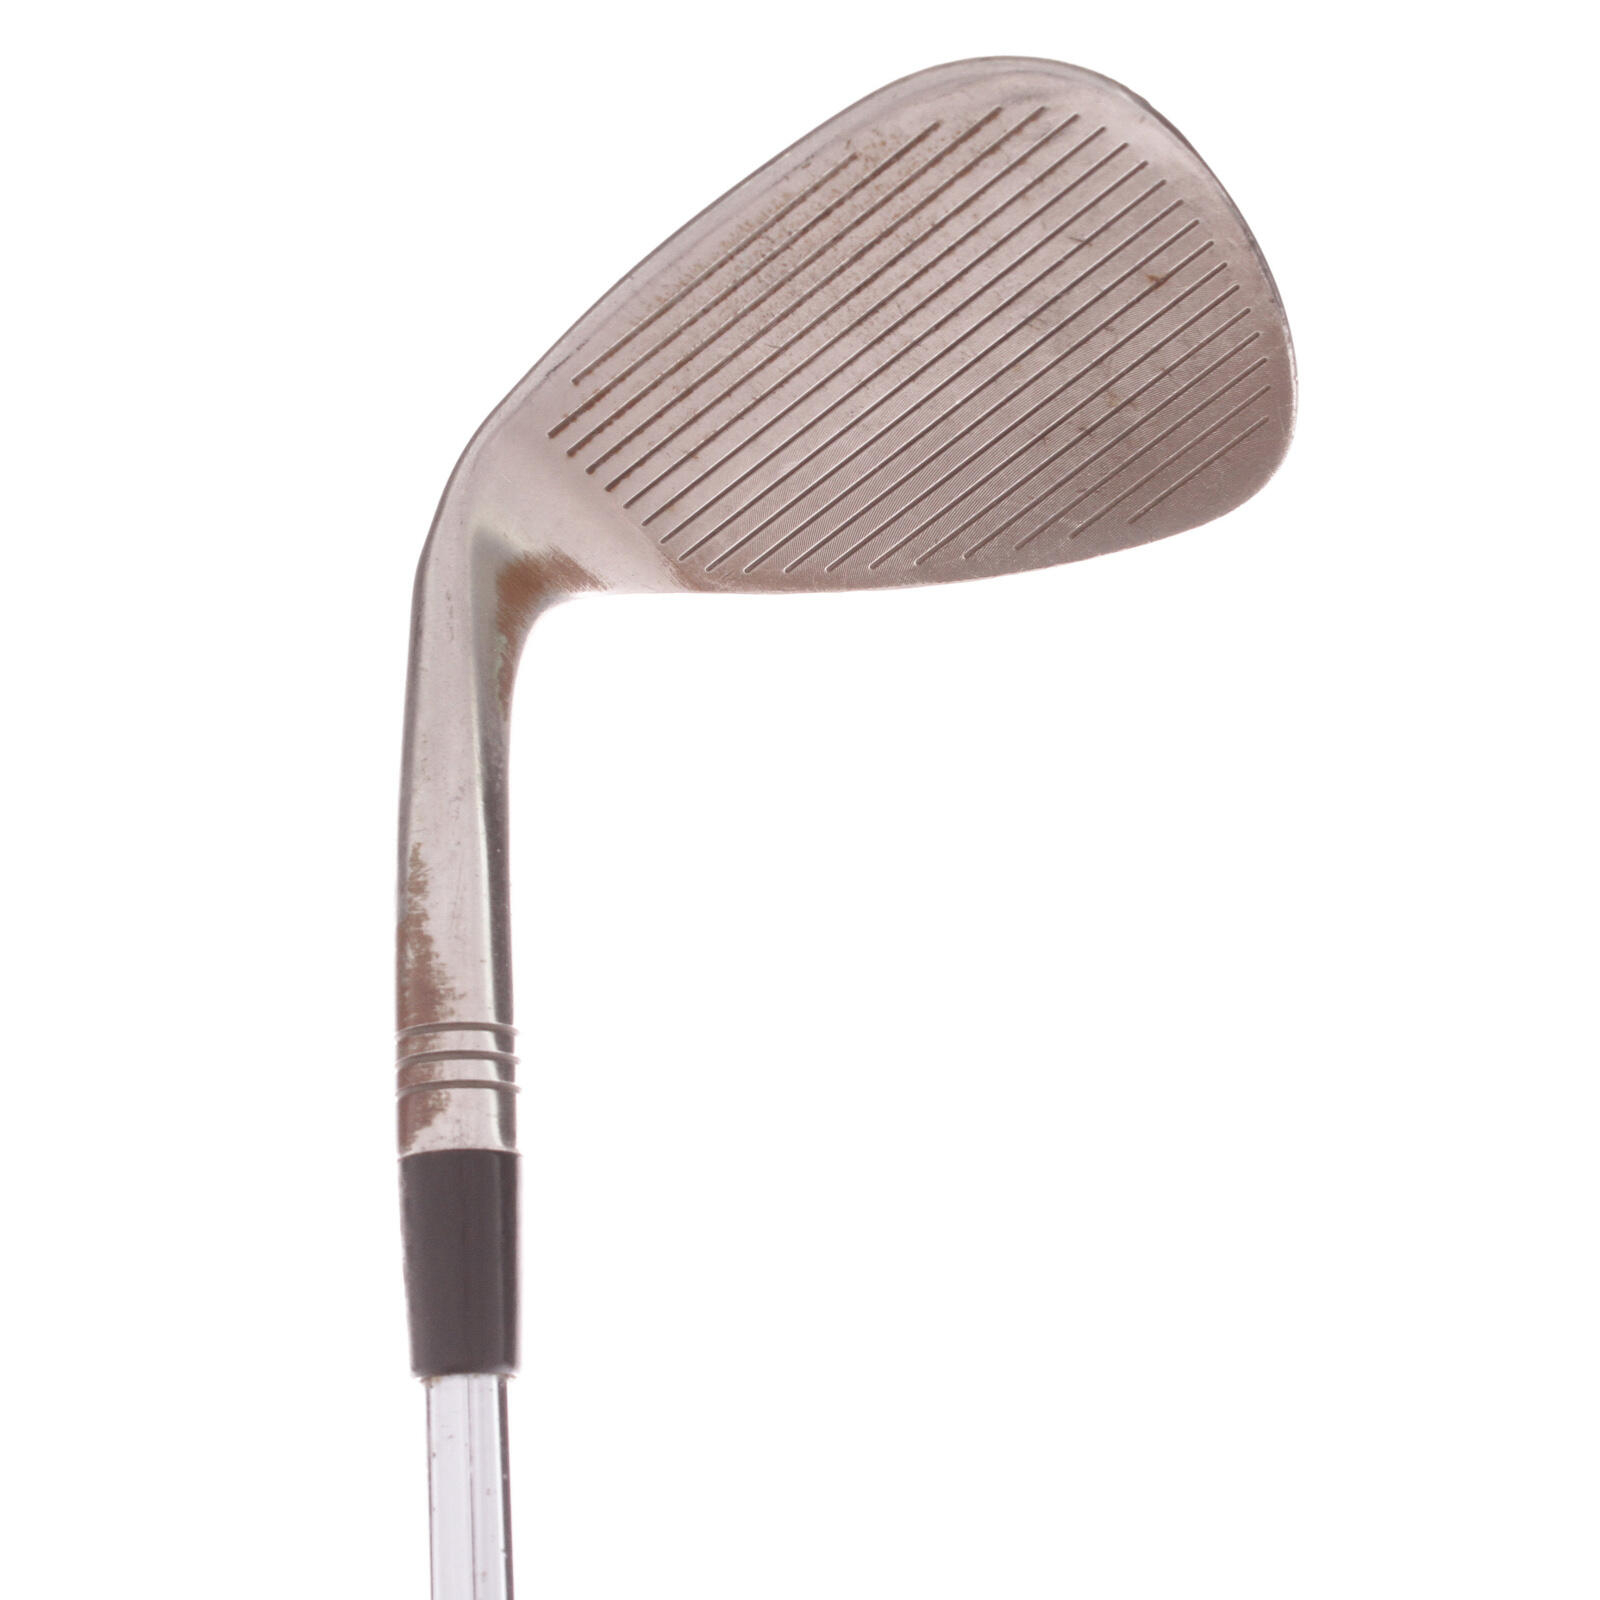 USED - Lob Wedge TaylorMade Hi-Toe 58 Degree Steel Shaft Right Handed - GRADE D 2/5